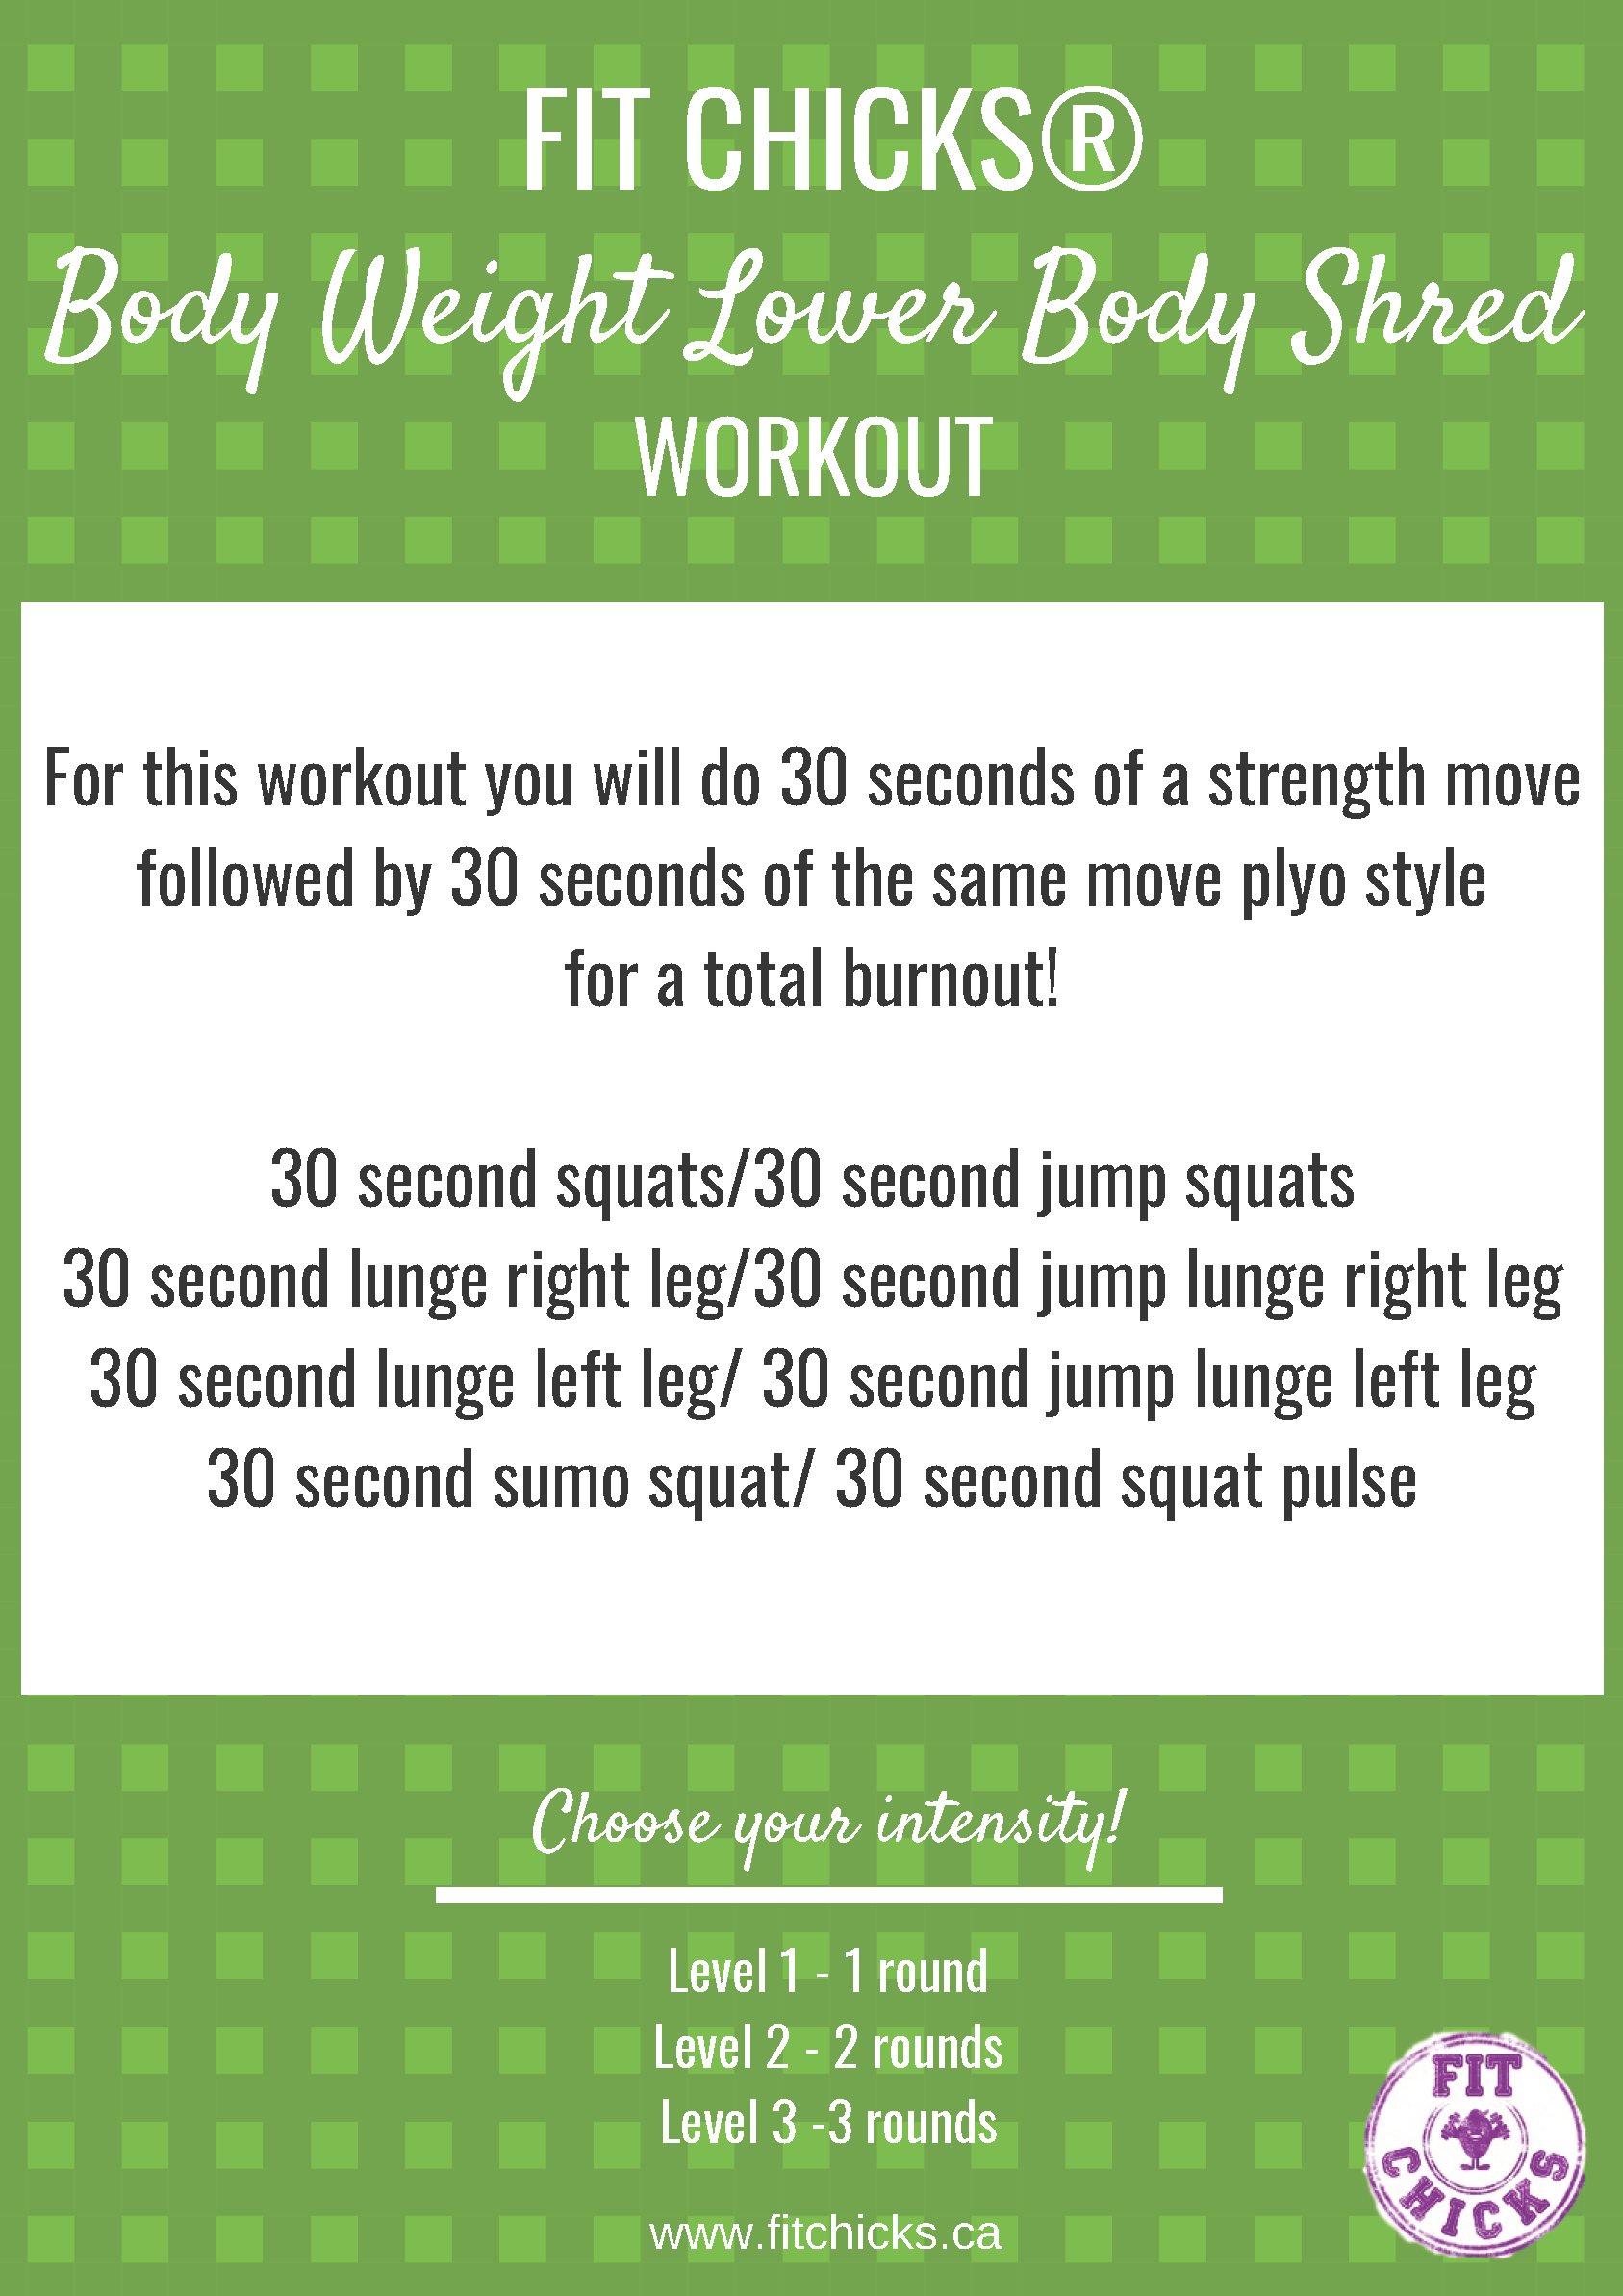 https://www.fitchicksacademy.com/wp-content/uploads/2018/08/HIIT-lowerbodyshred.png